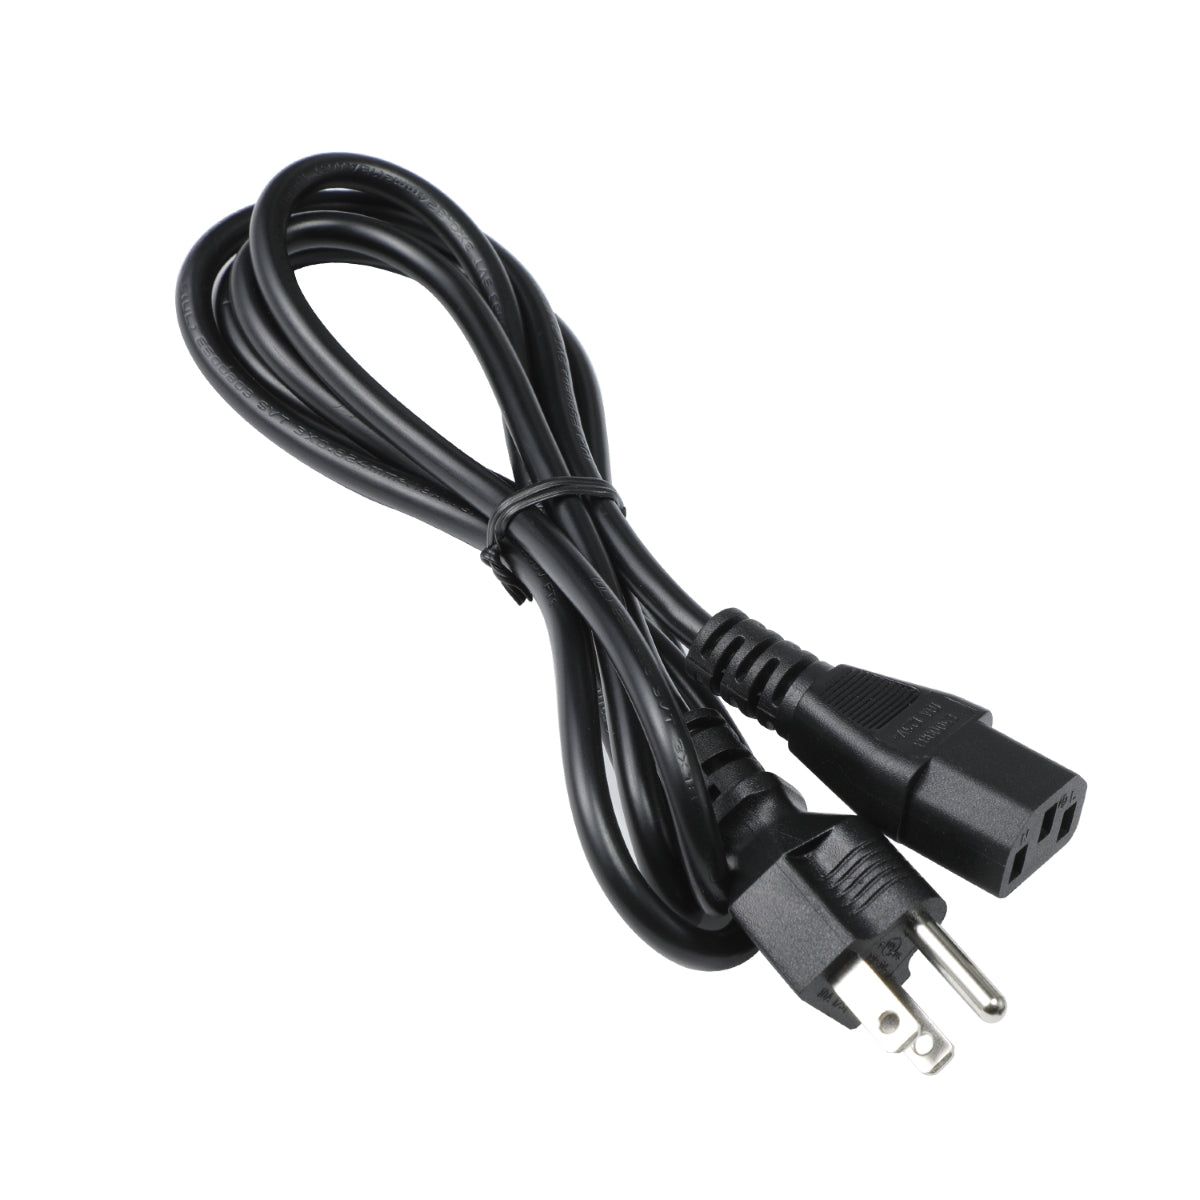 Power Cord for BenQ PD3200Q IPS Monitor